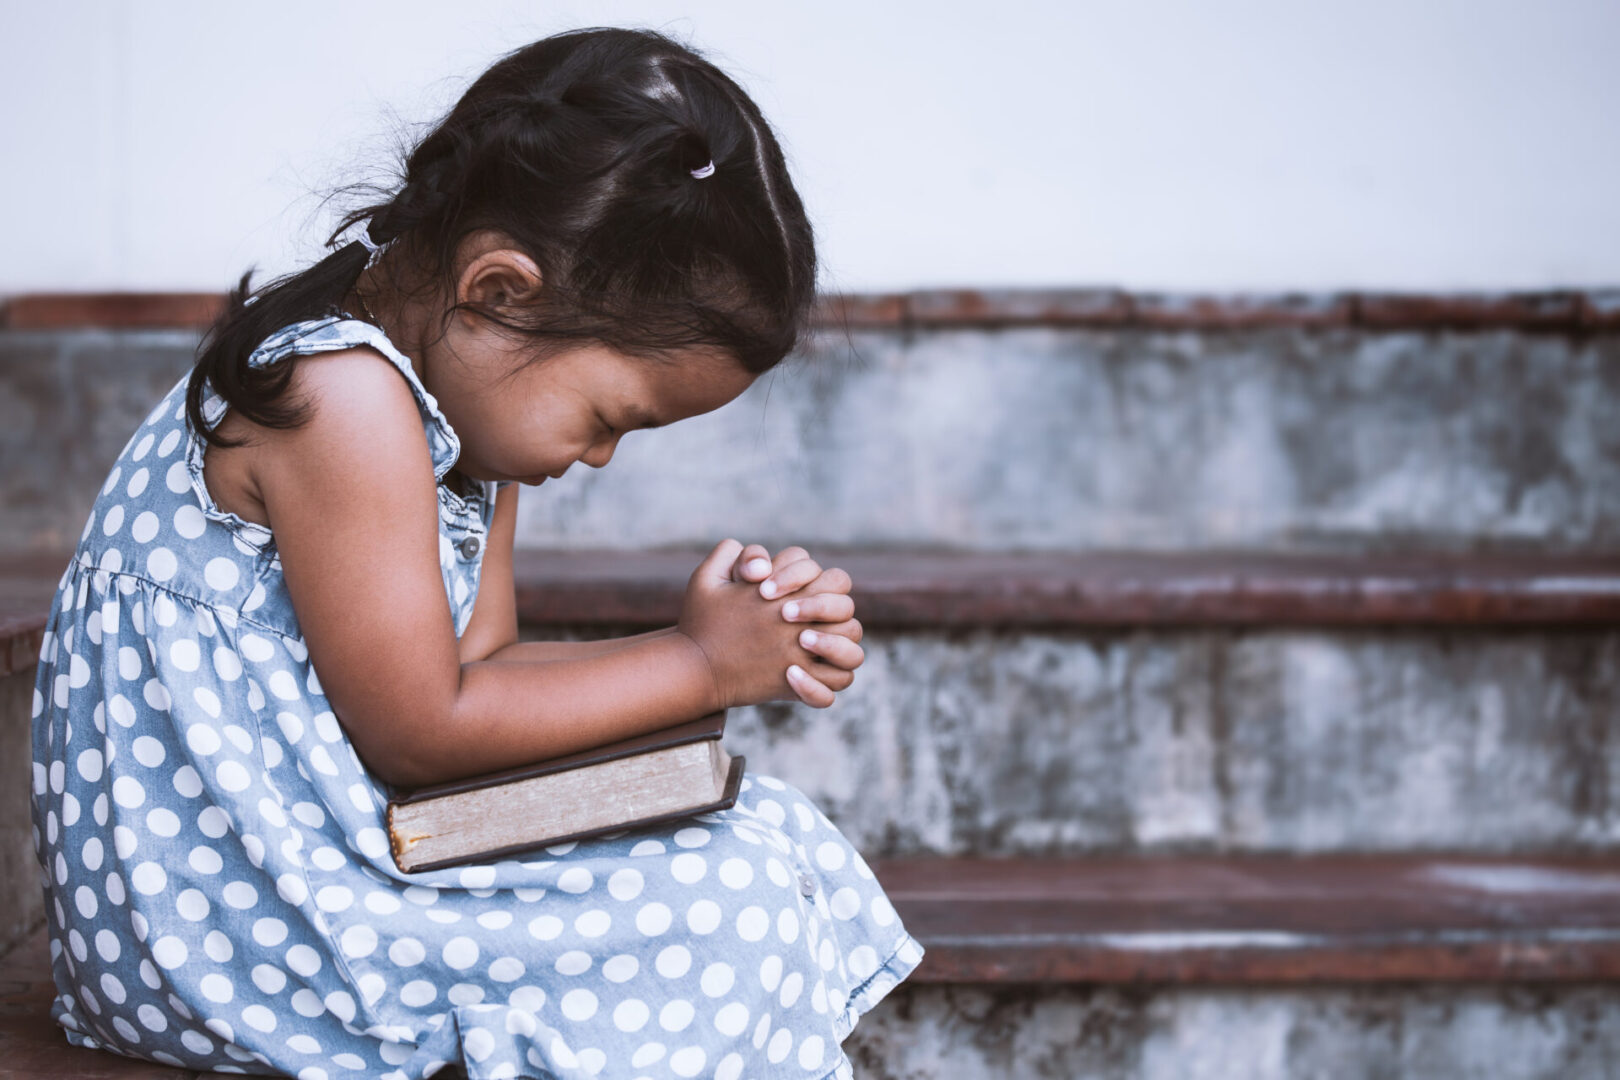 A little girl sitting on the steps holding a book.